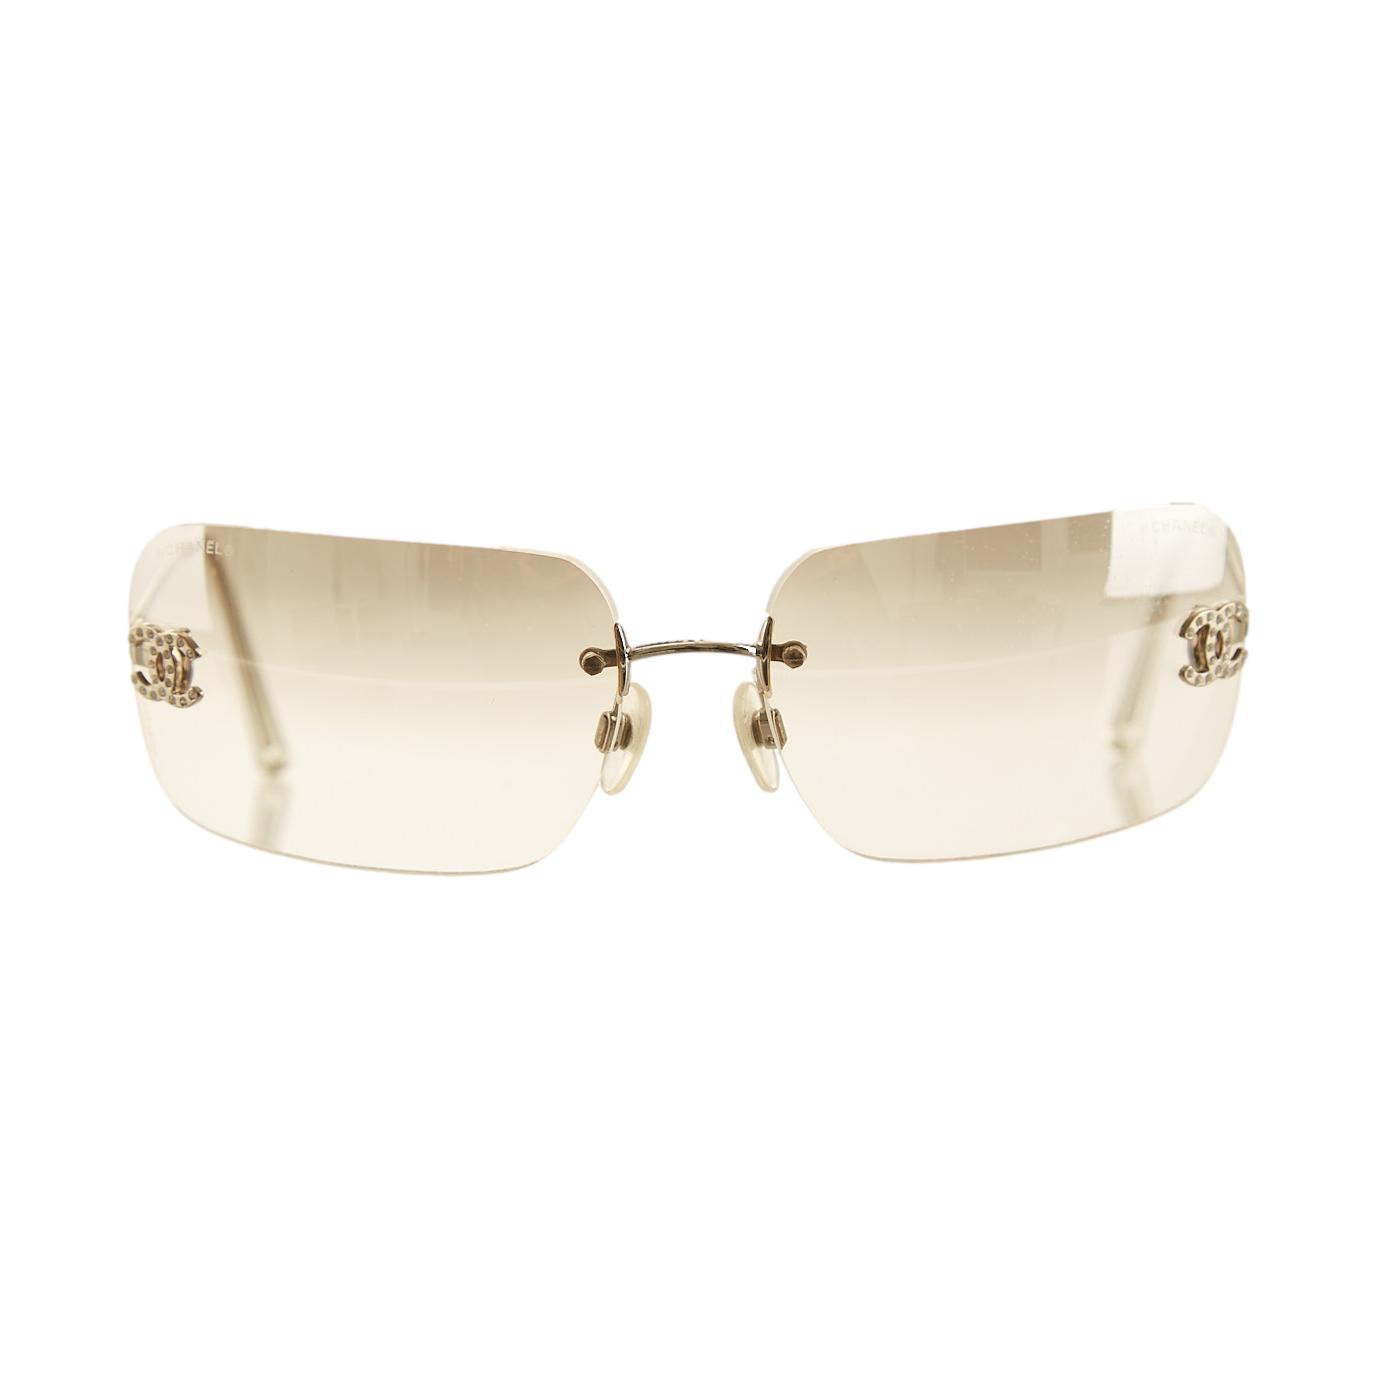 Chanel Sunglasses Eyewear Clear Small Good L6627629 54#19 Auction